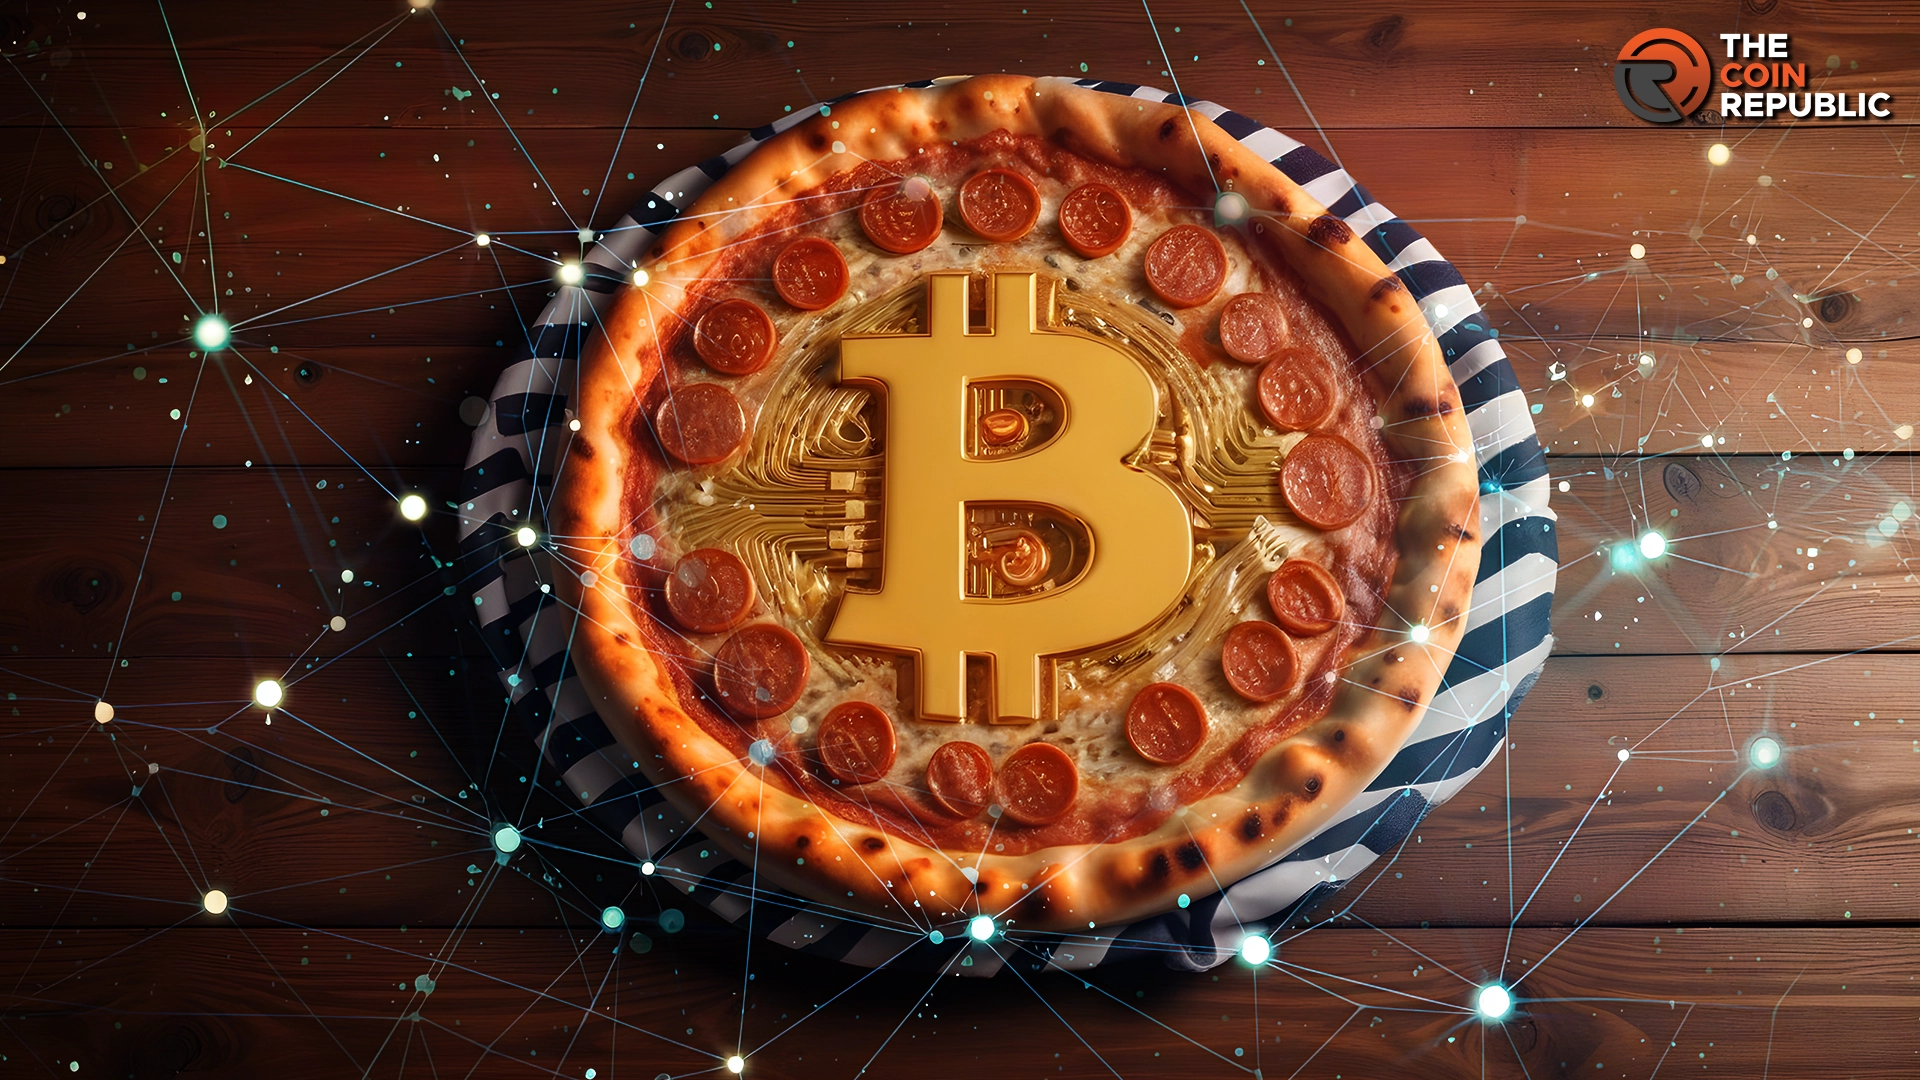 BitMart and Consensys Announced Events on 14th Bitcoin Pizza Day